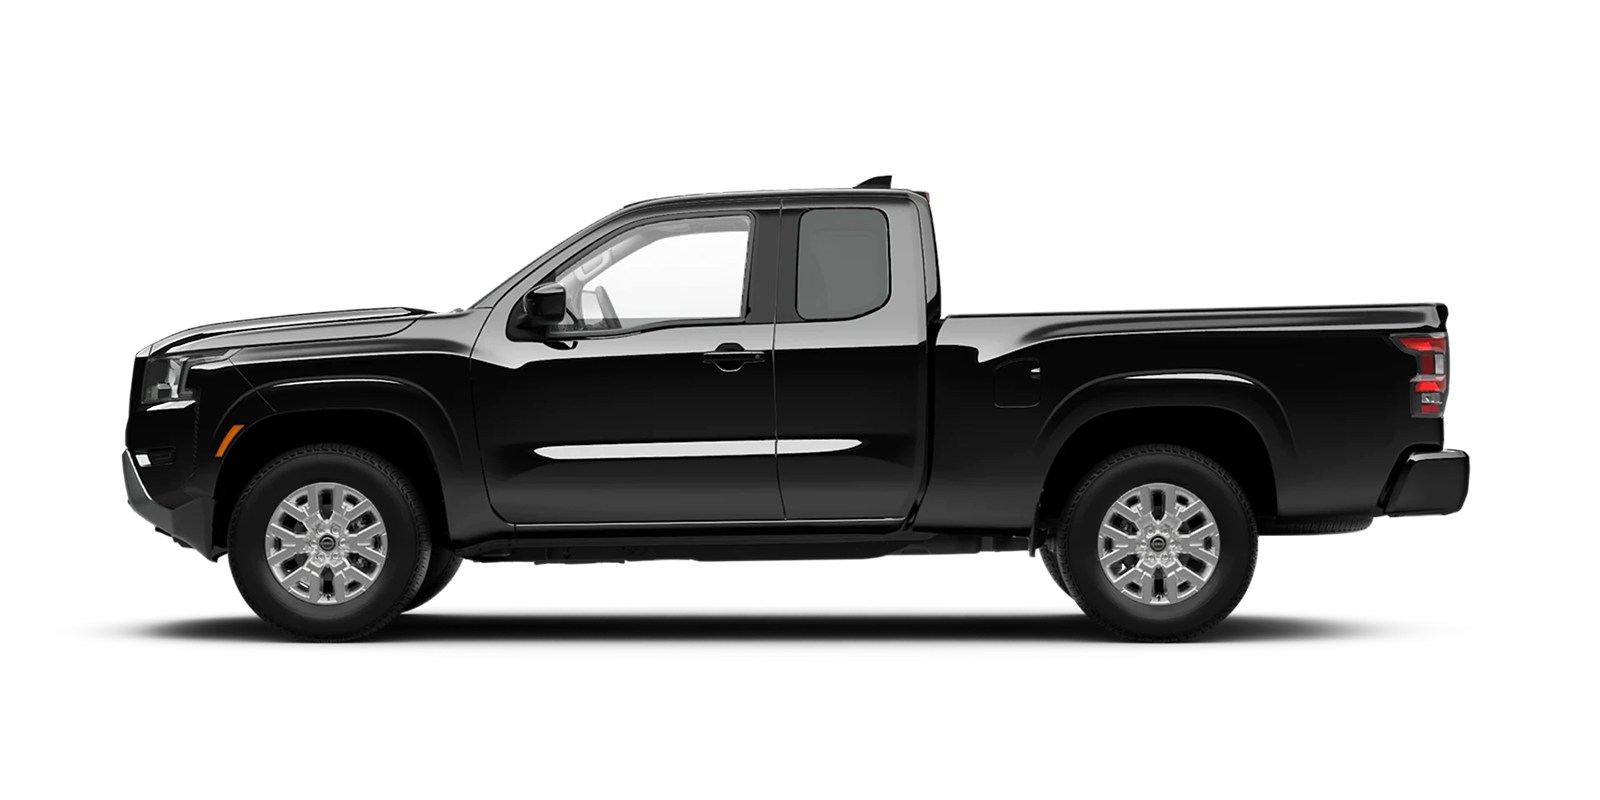 2022 Frontier King Cab SV 4x4 in Super Black | Greenway Nissan of Florence in Florence AL